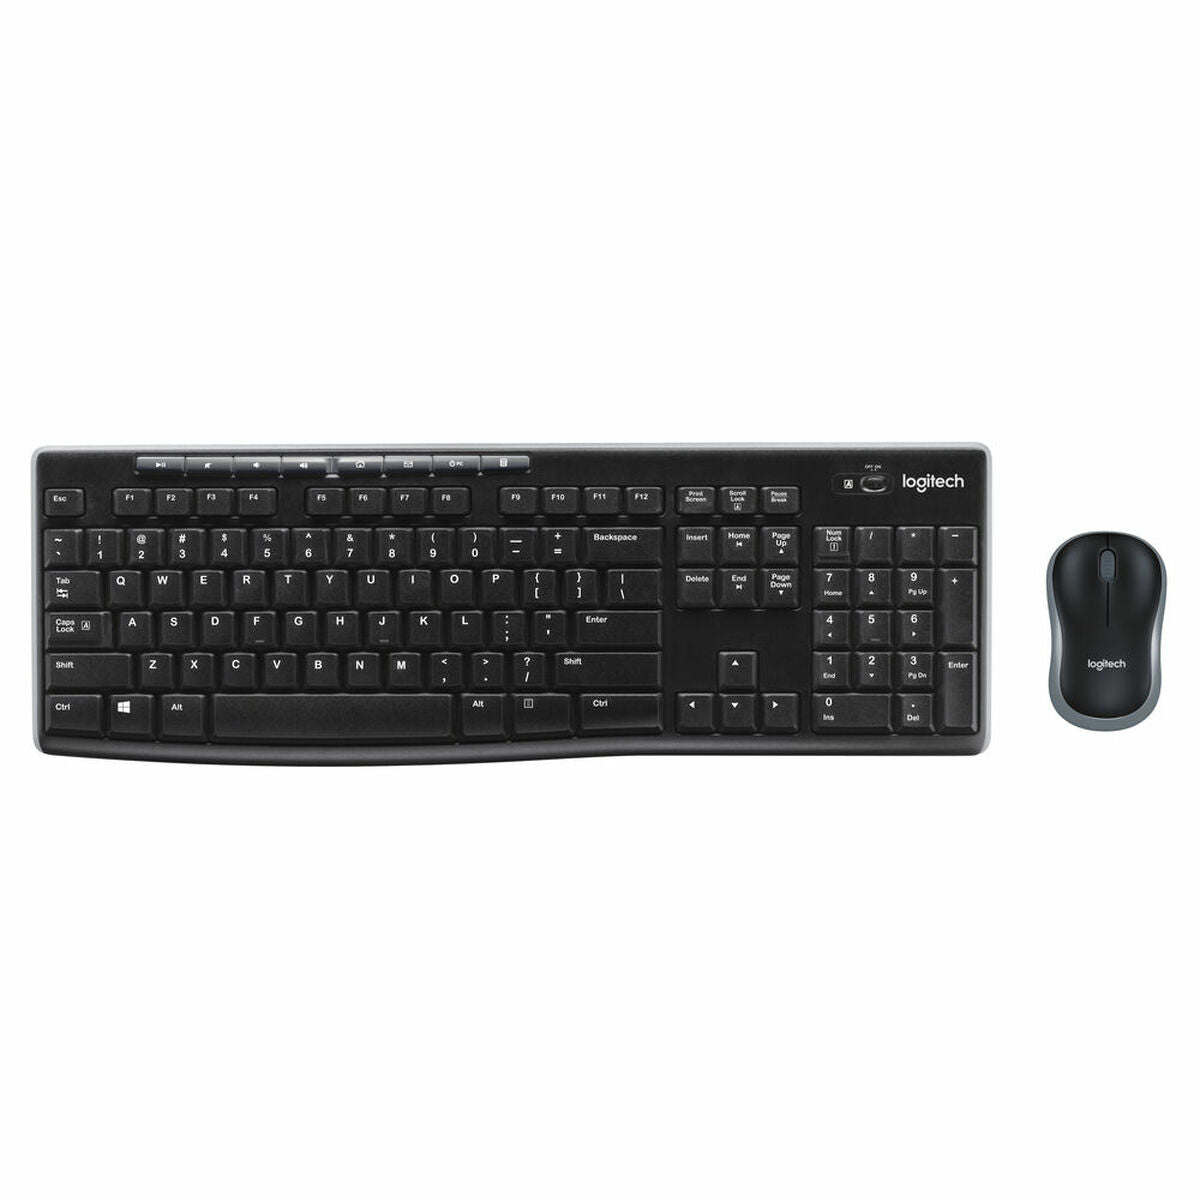 Keyboard and Wireless Mouse Logitech MK270 QWERTY English, Logitech, Computing, Accessories, keyboard-and-wireless-mouse-logitech-mk270-qwerty-english, :English, :QWERTY, Brand_Logitech, category-reference-2609, category-reference-2642, category-reference-2646, category-reference-t-19685, category-reference-t-19908, category-reference-t-21353, computers / peripherals, Condition_NEW, office, Price_50 - 100, Teleworking, RiotNook